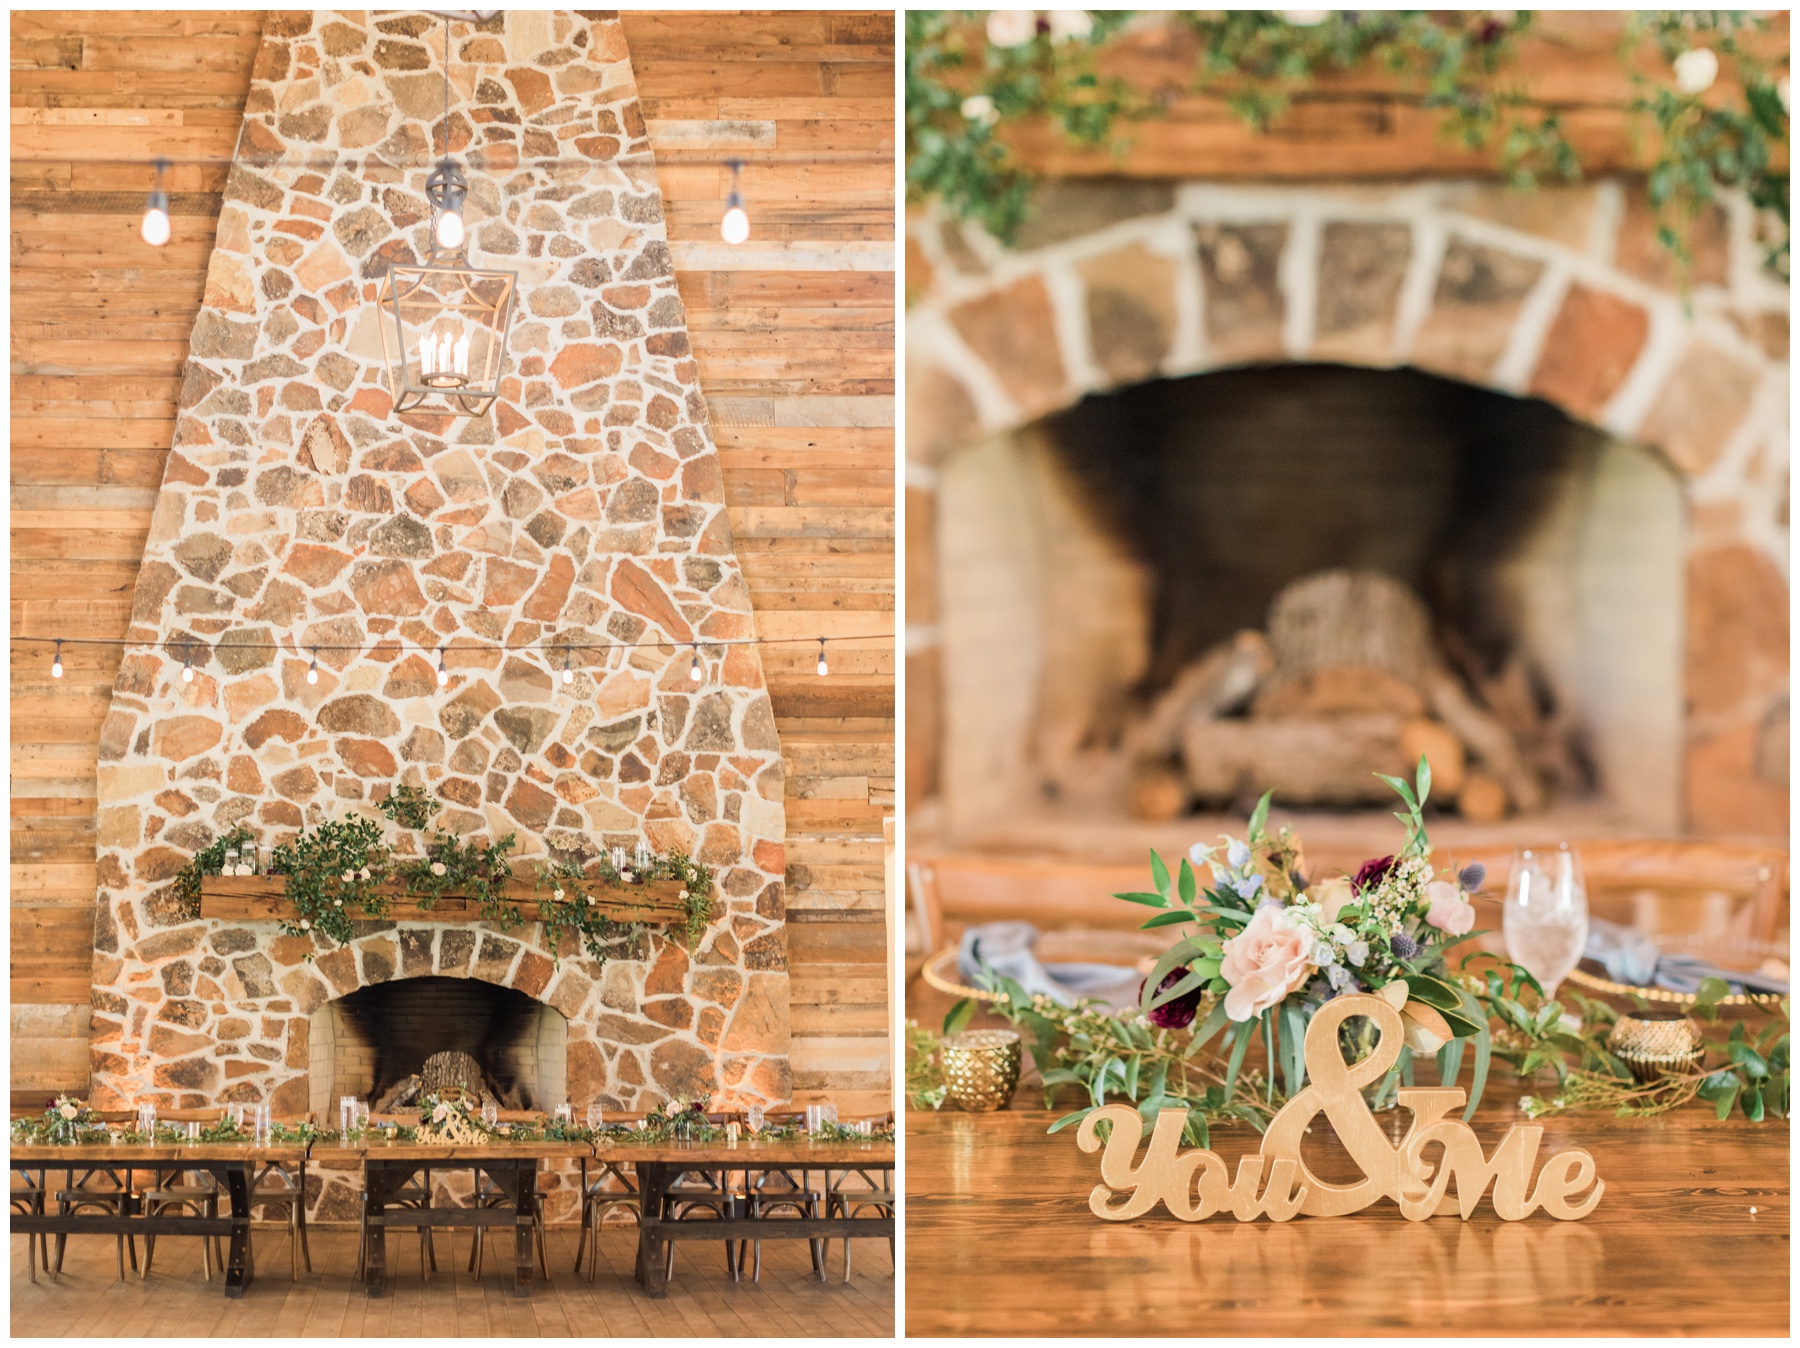 Wooden bistro chairs, cafe lights, and elevated floral centerpieces for a spring wedding reception